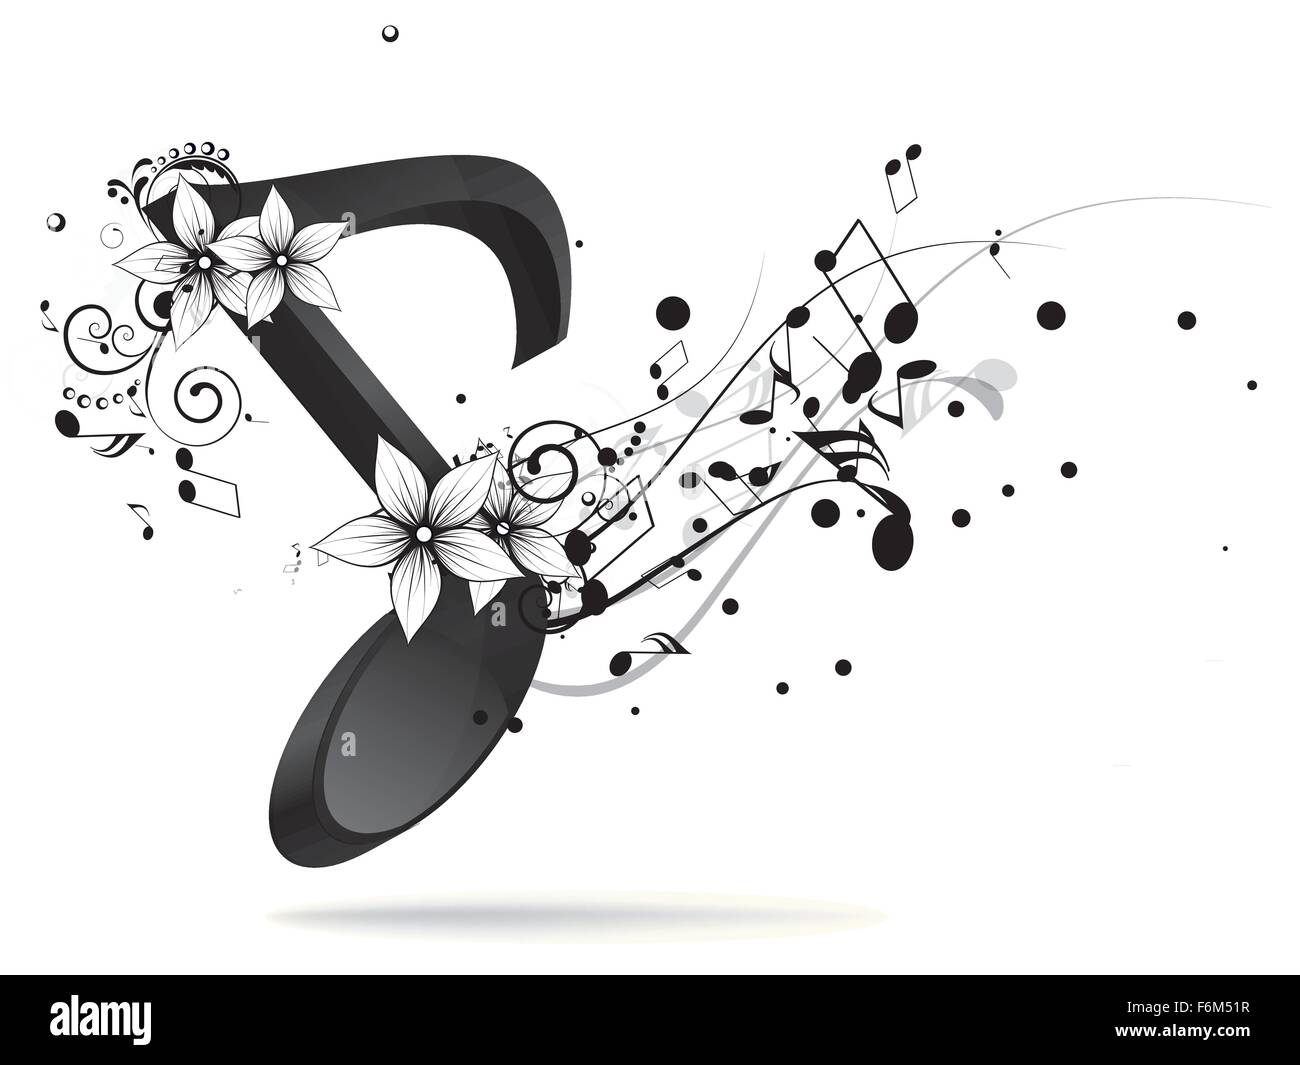 Abstract music background with notes. Stock Vector